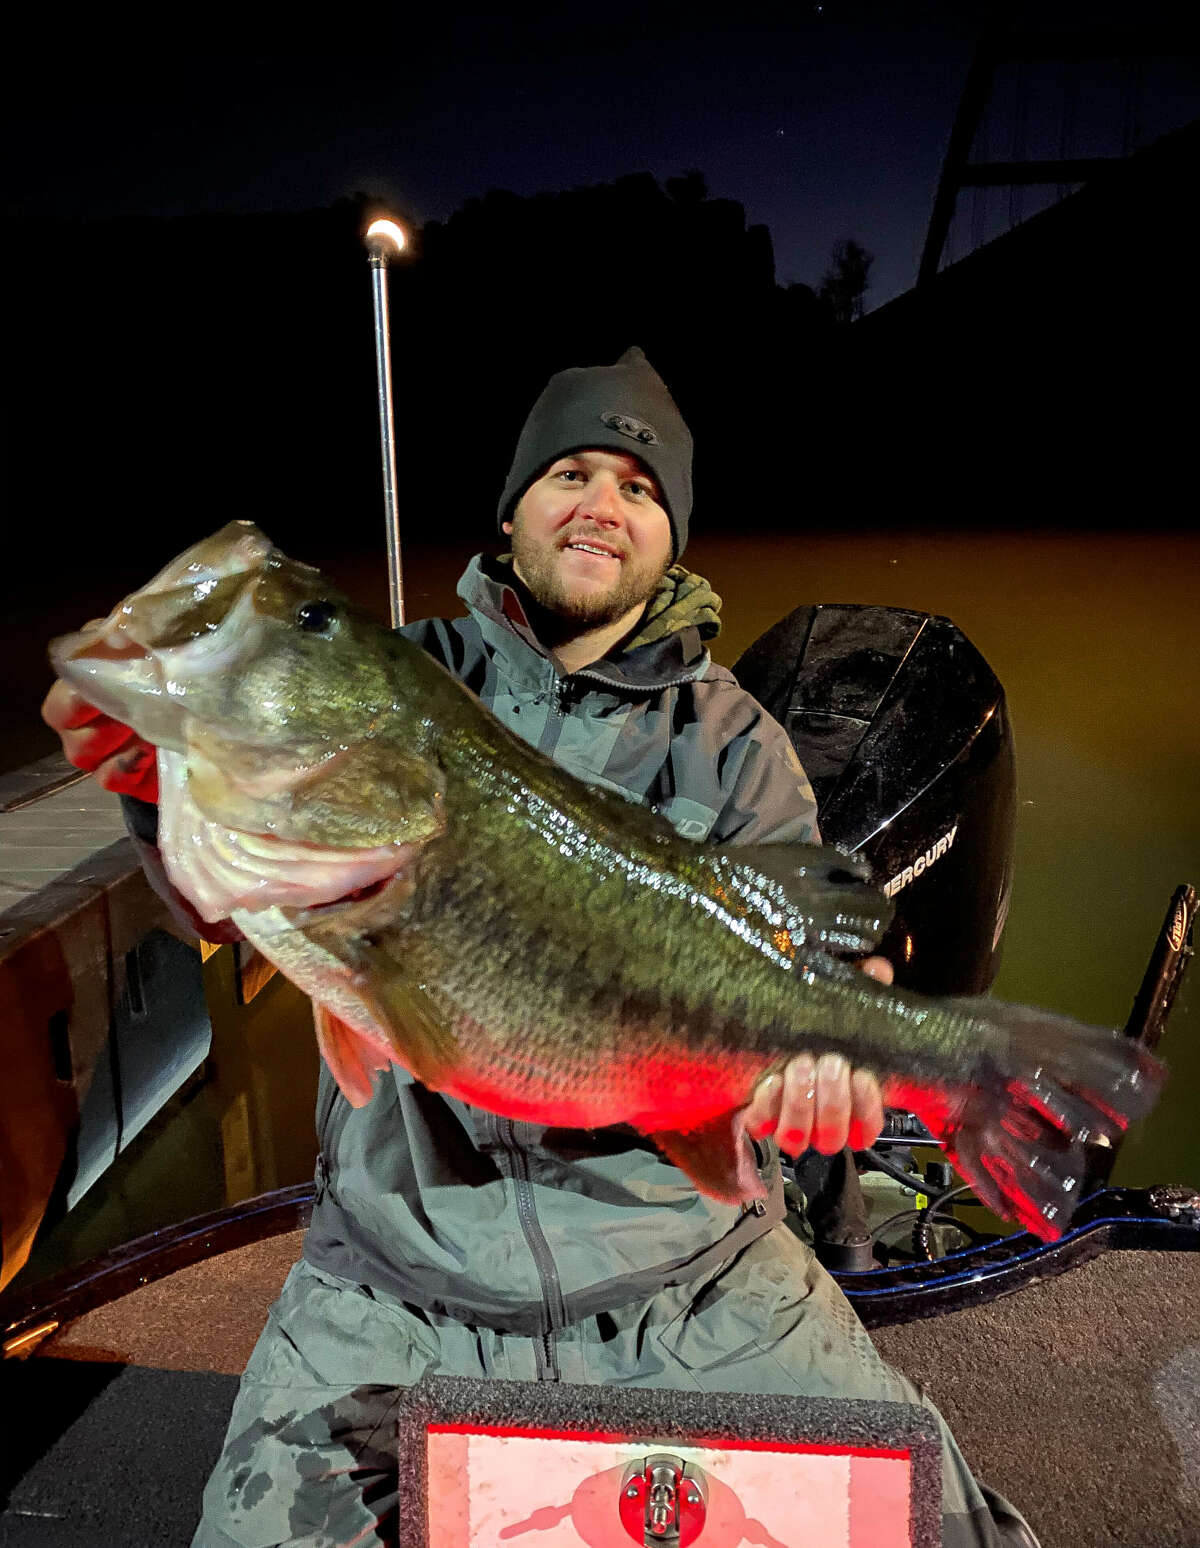 CJ Oates from Lago Vista reeled in a massive 13.02-pound largemouth bass while fishing in Lake Austin on Jan. 14.